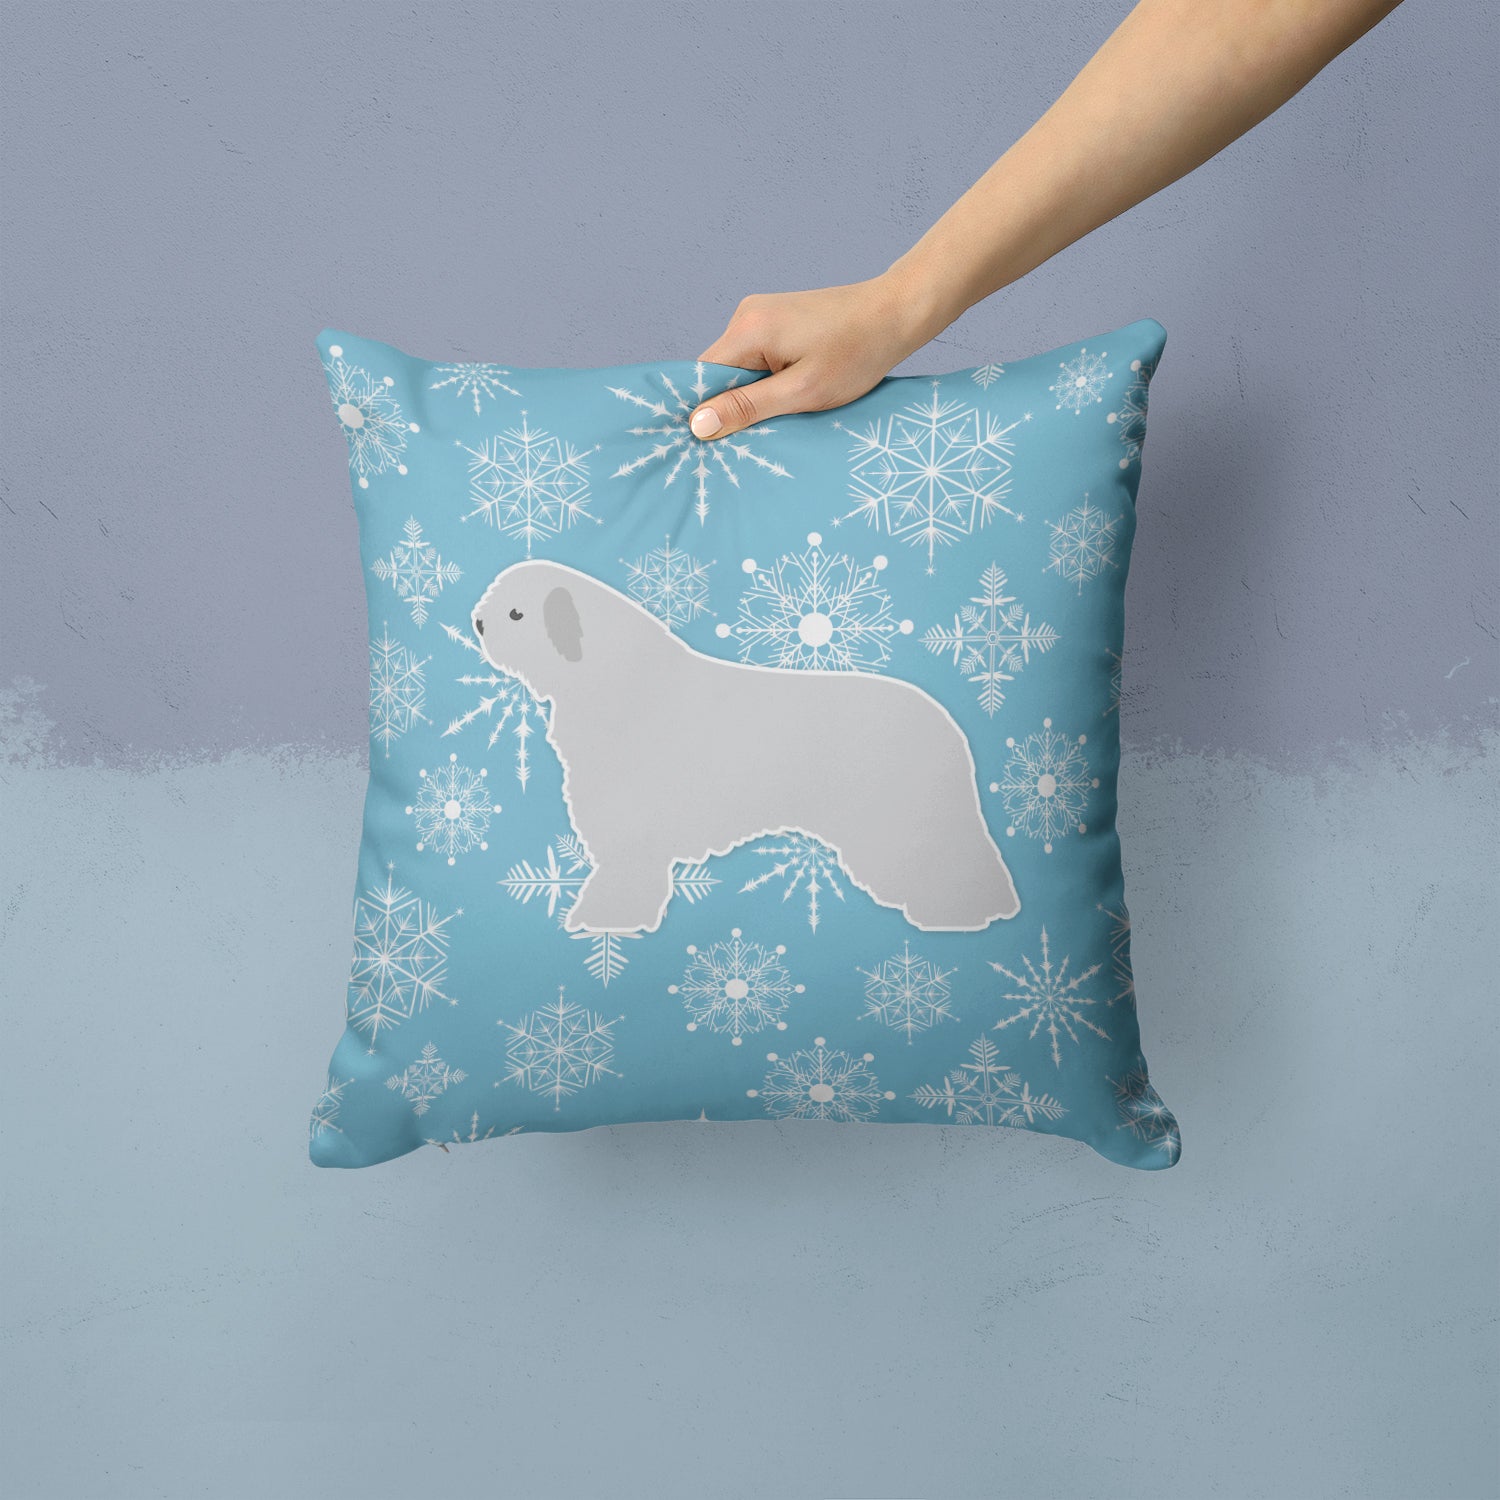 Winter Snowflake Spanish Water Dog Fabric Decorative Pillow BB3515PW1414 - the-store.com